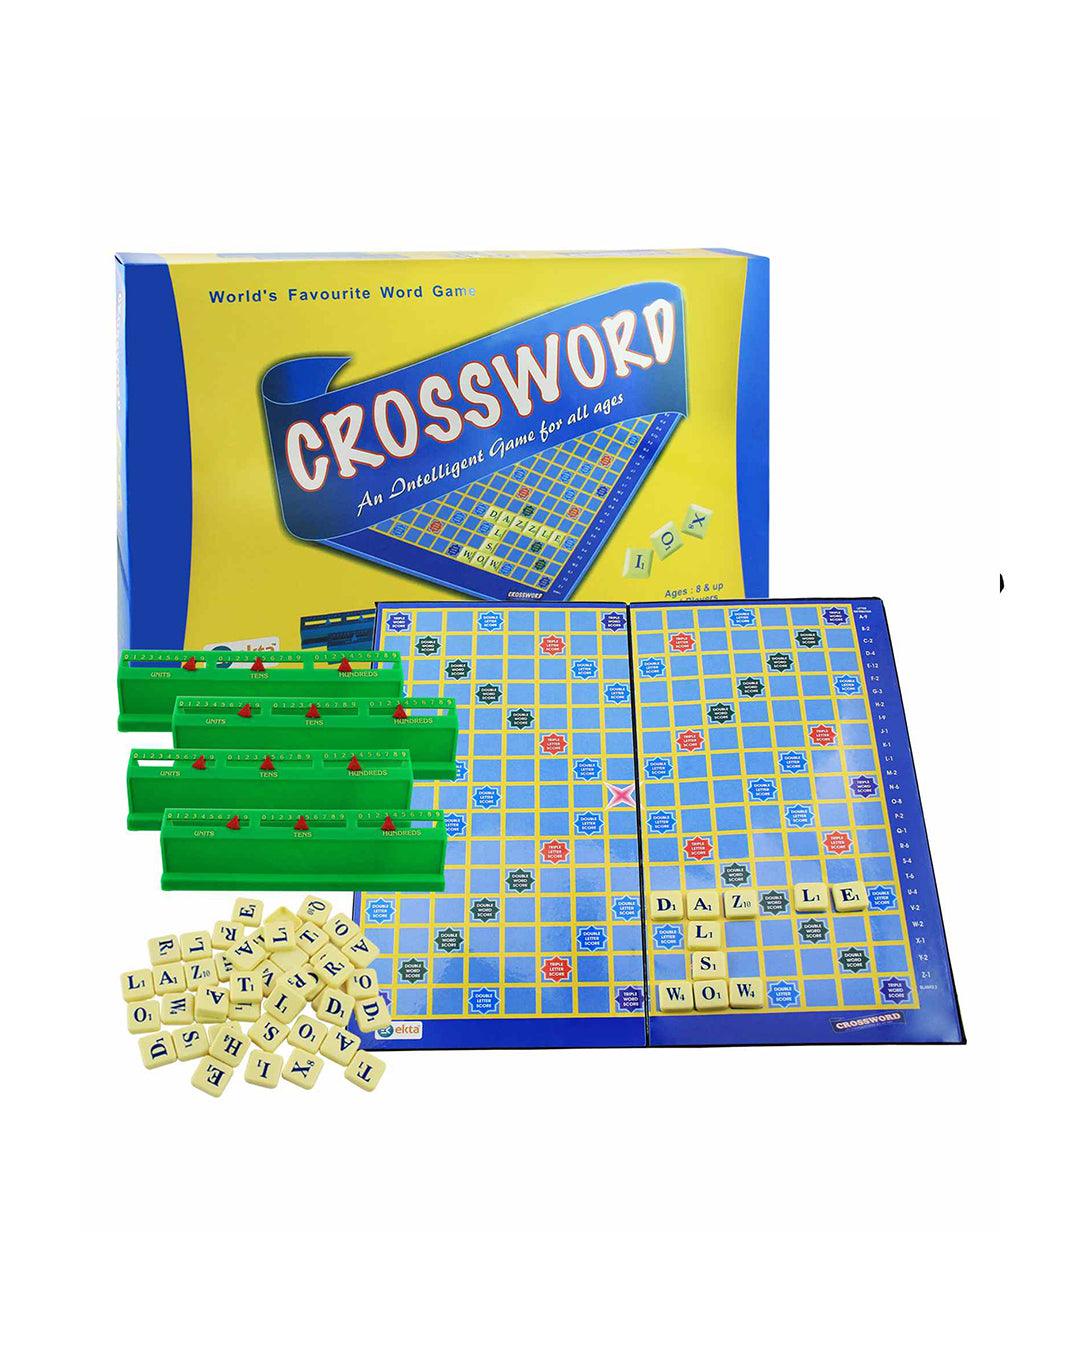 EKTA Crossword Game With Folding Board - For Child Age 5 & Up (2-4 Players) - MARKET 99